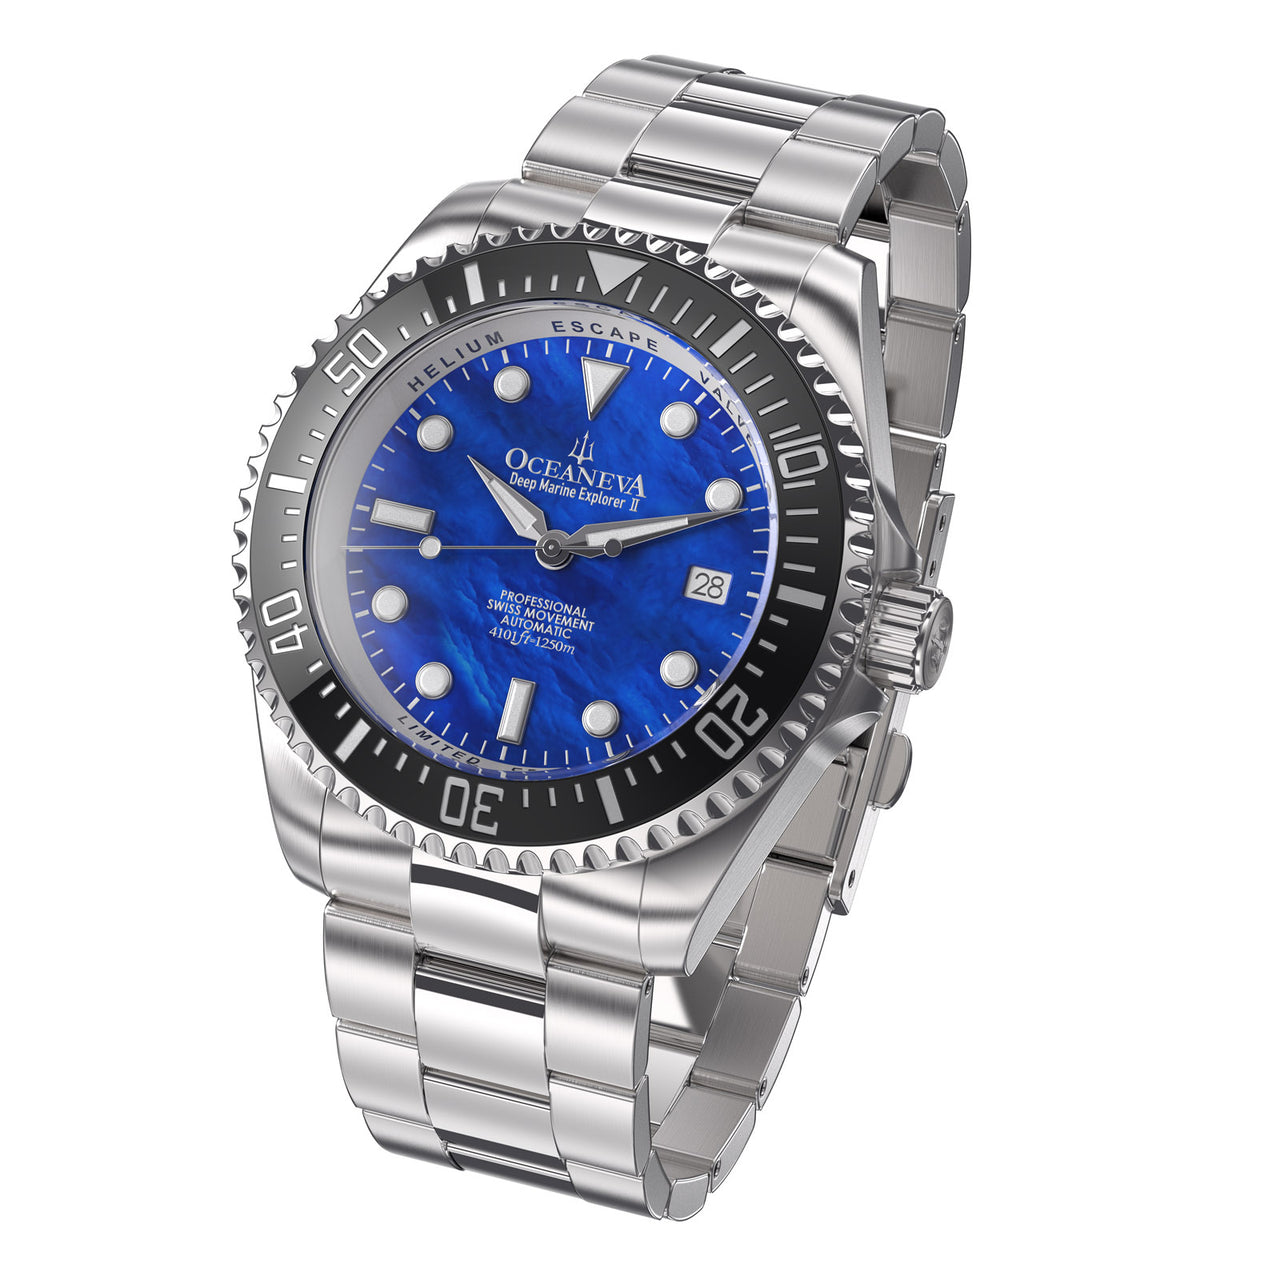 Oceaneva 1250M Dive Watch Blue Mother of Pearl Front Picture Slight Left Slant View